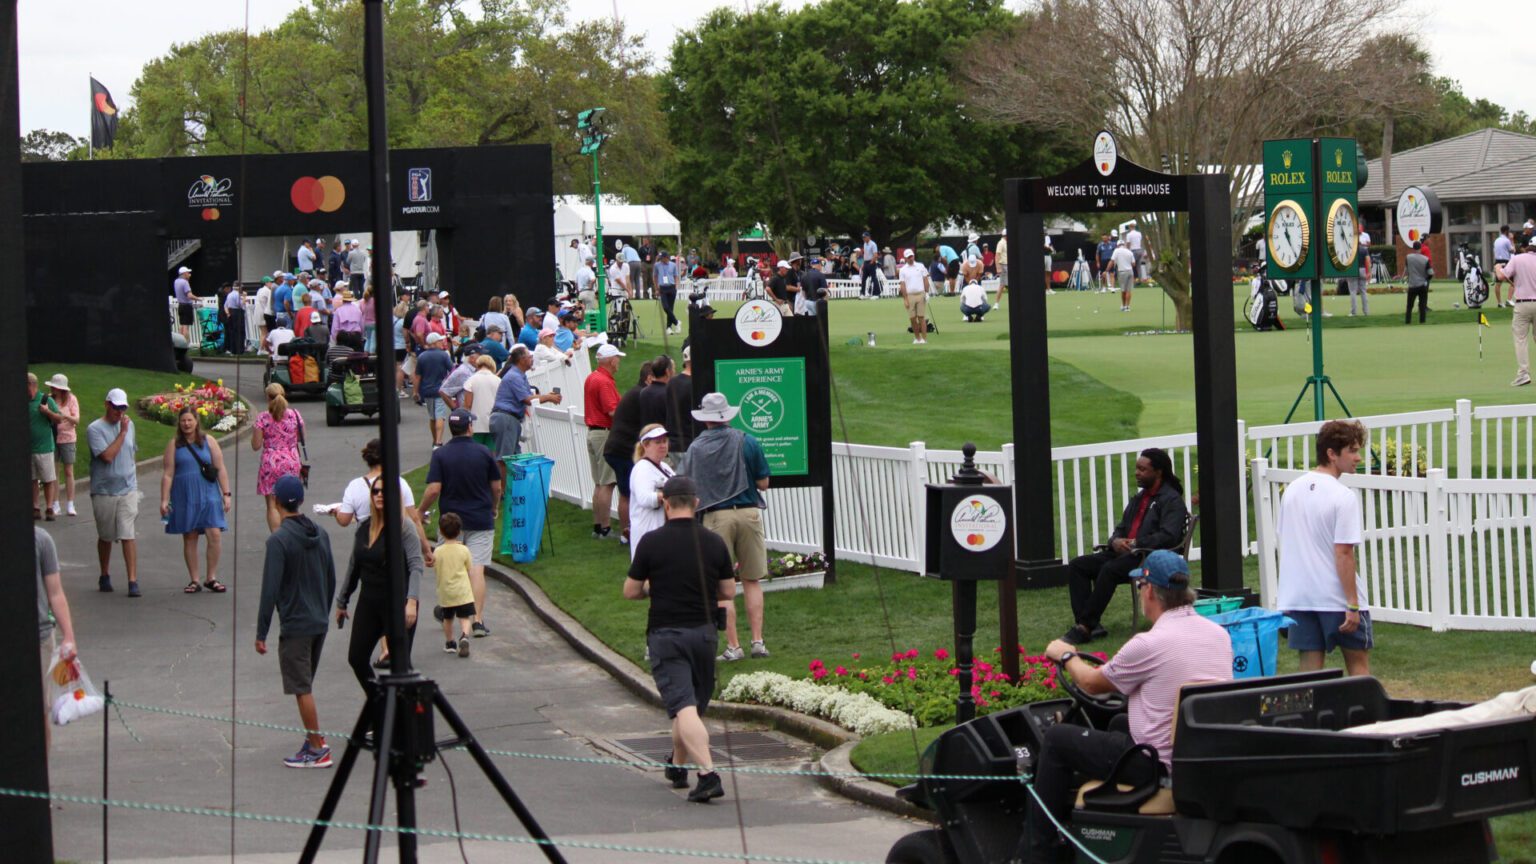 Arnold Palmer Invitational highlights golf and family The Toronto